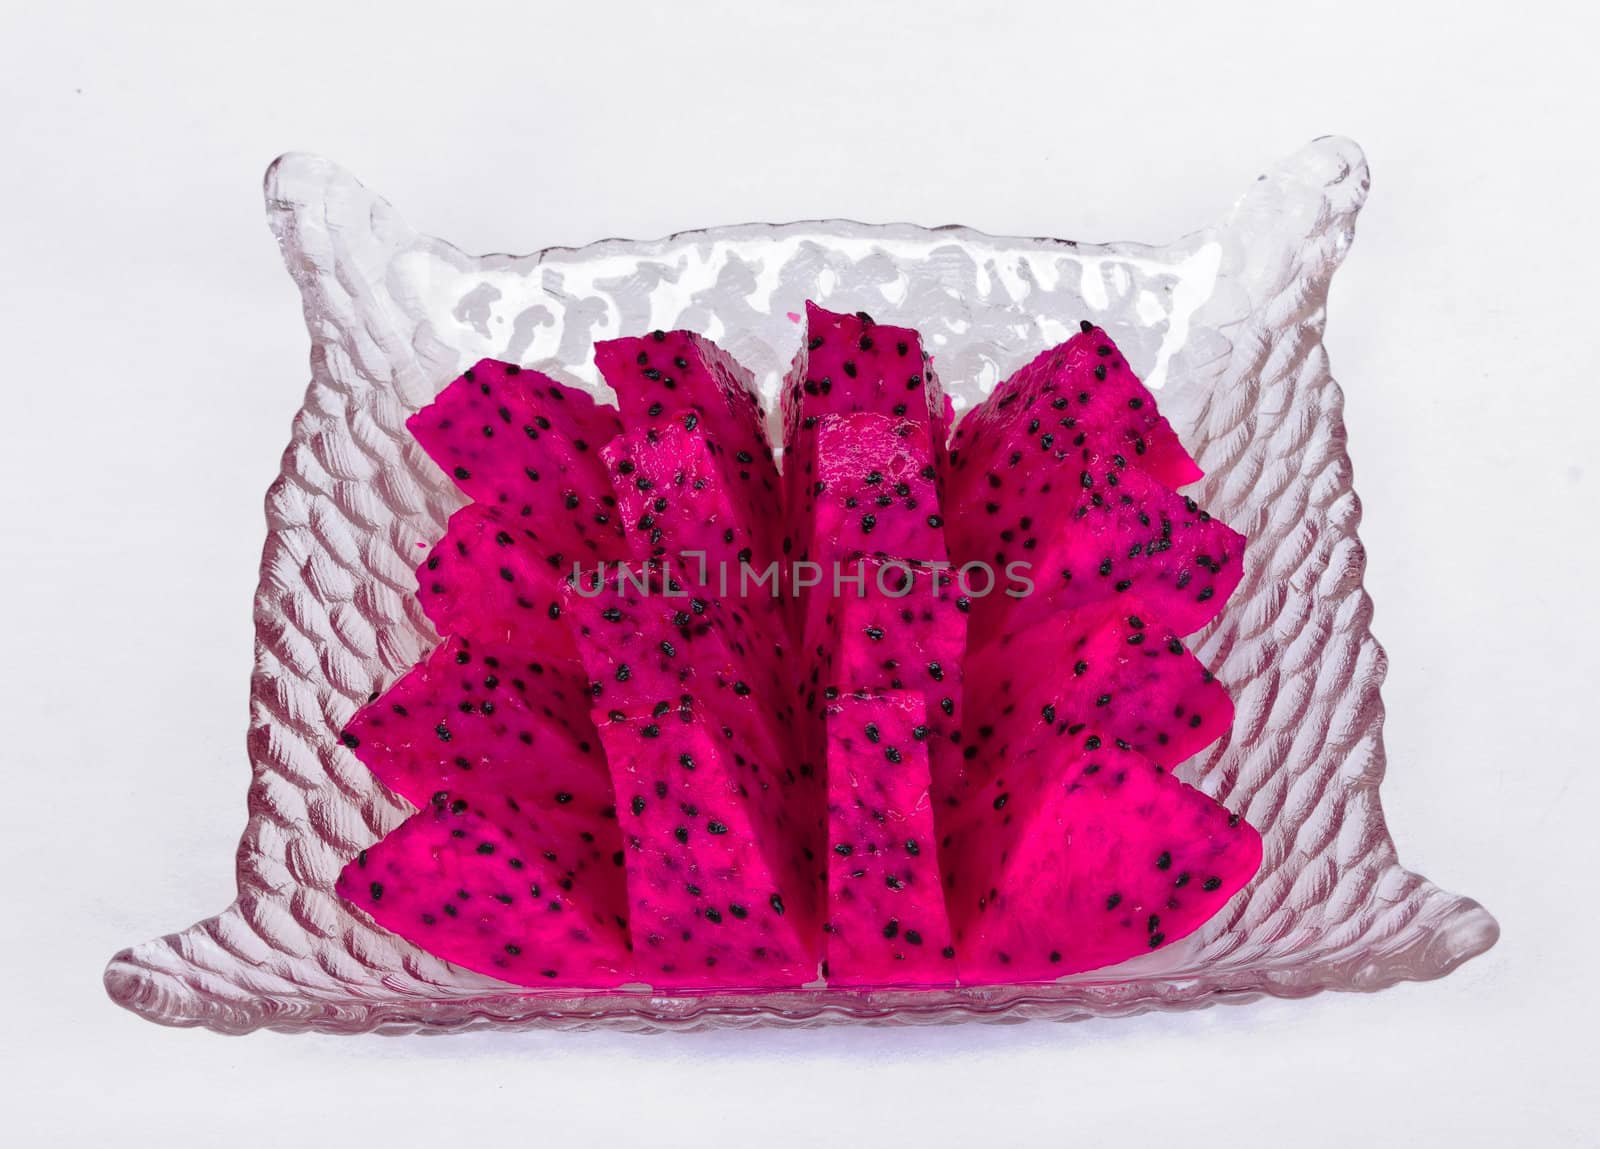 Red dragon fruit cut into pieces in a glass dish